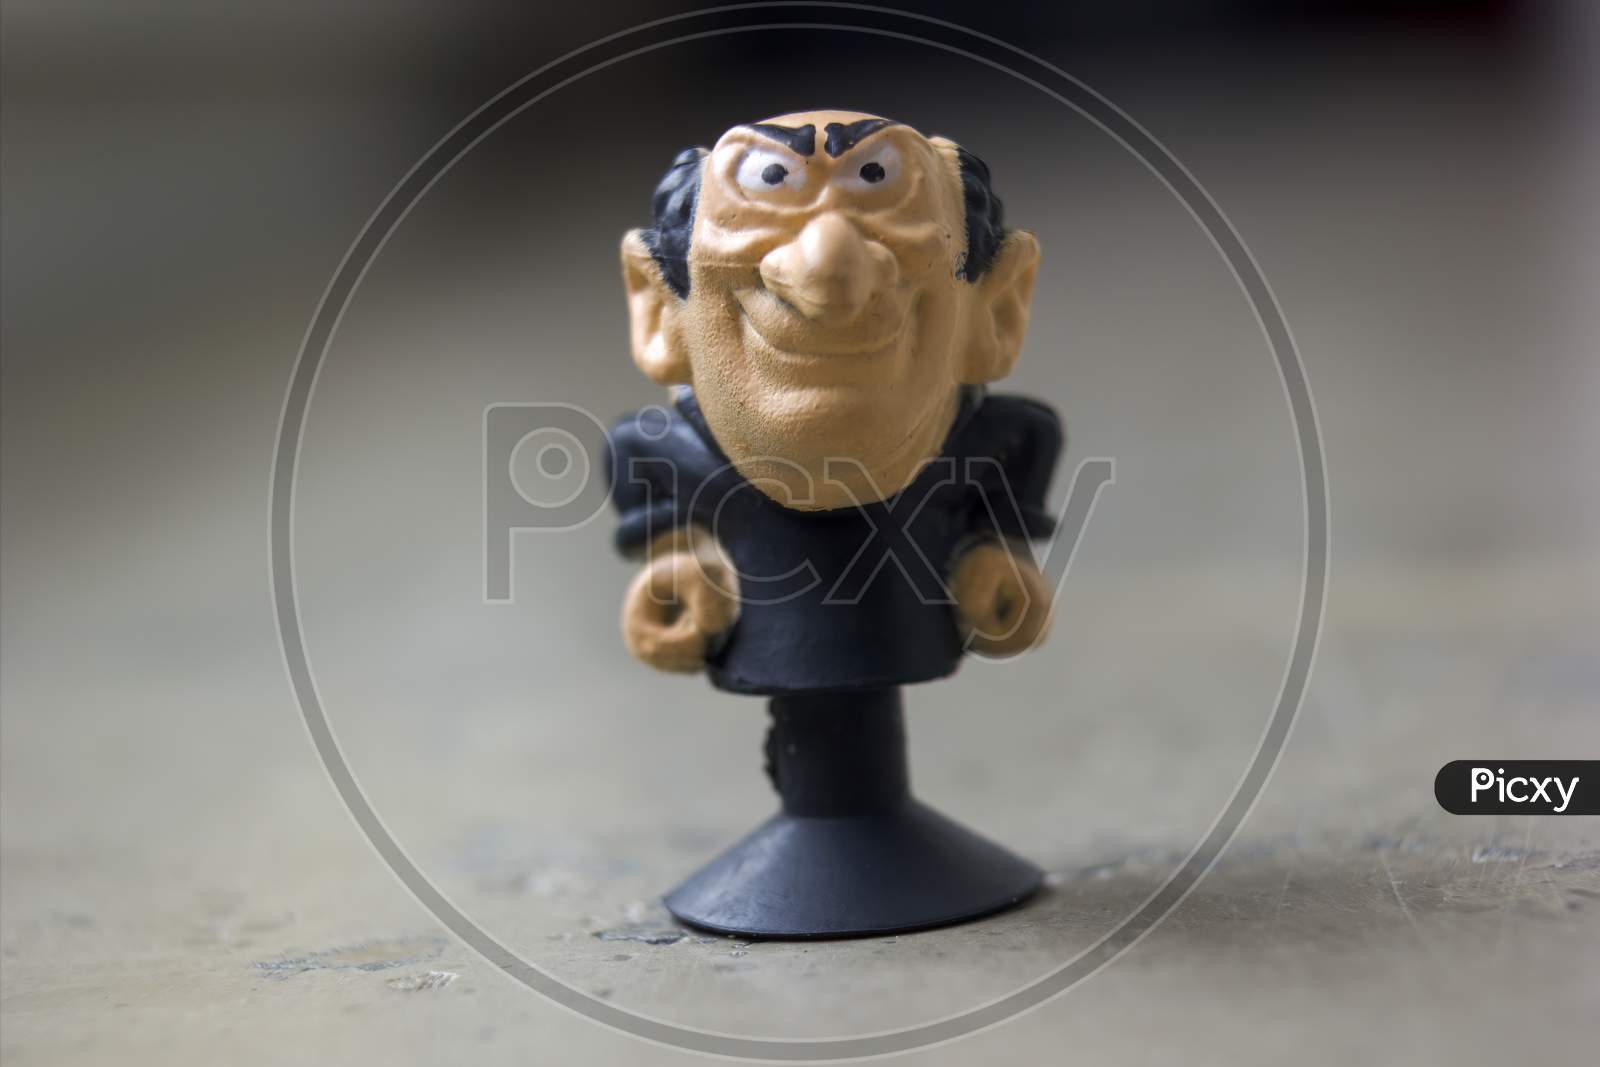 Krakow, Poland - May 01, 2021: Extreme Close Up Macro Shot Of A Tiny Gargamel Rubber Toy Figure A Fictional Character From The Smurfs. He Is An Evil Wizard. Selective Focus. Shallow Depth Of Field